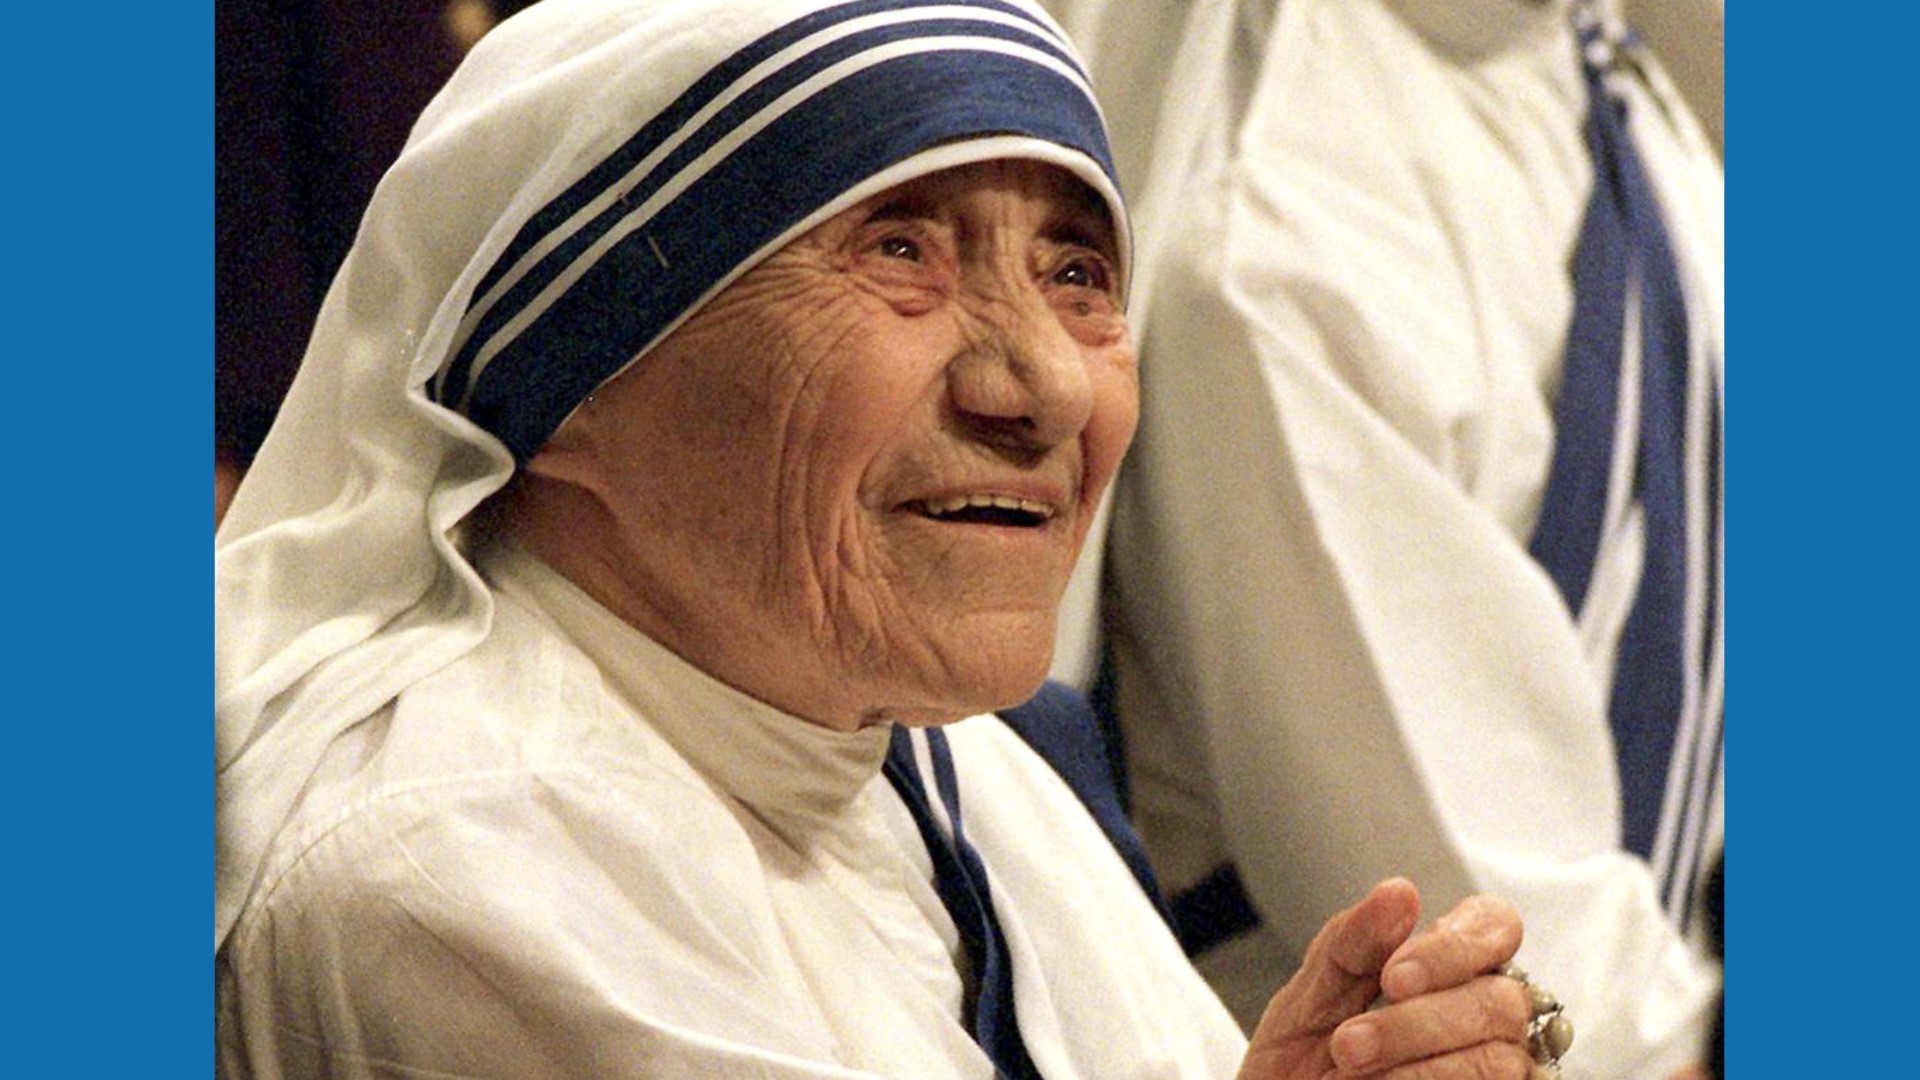 40 years ago, Mother Teresa received the Bellarmine Medal at Knights Hall. Tune into the Vault this Sunday, June 26, for more on her Louisville visit.